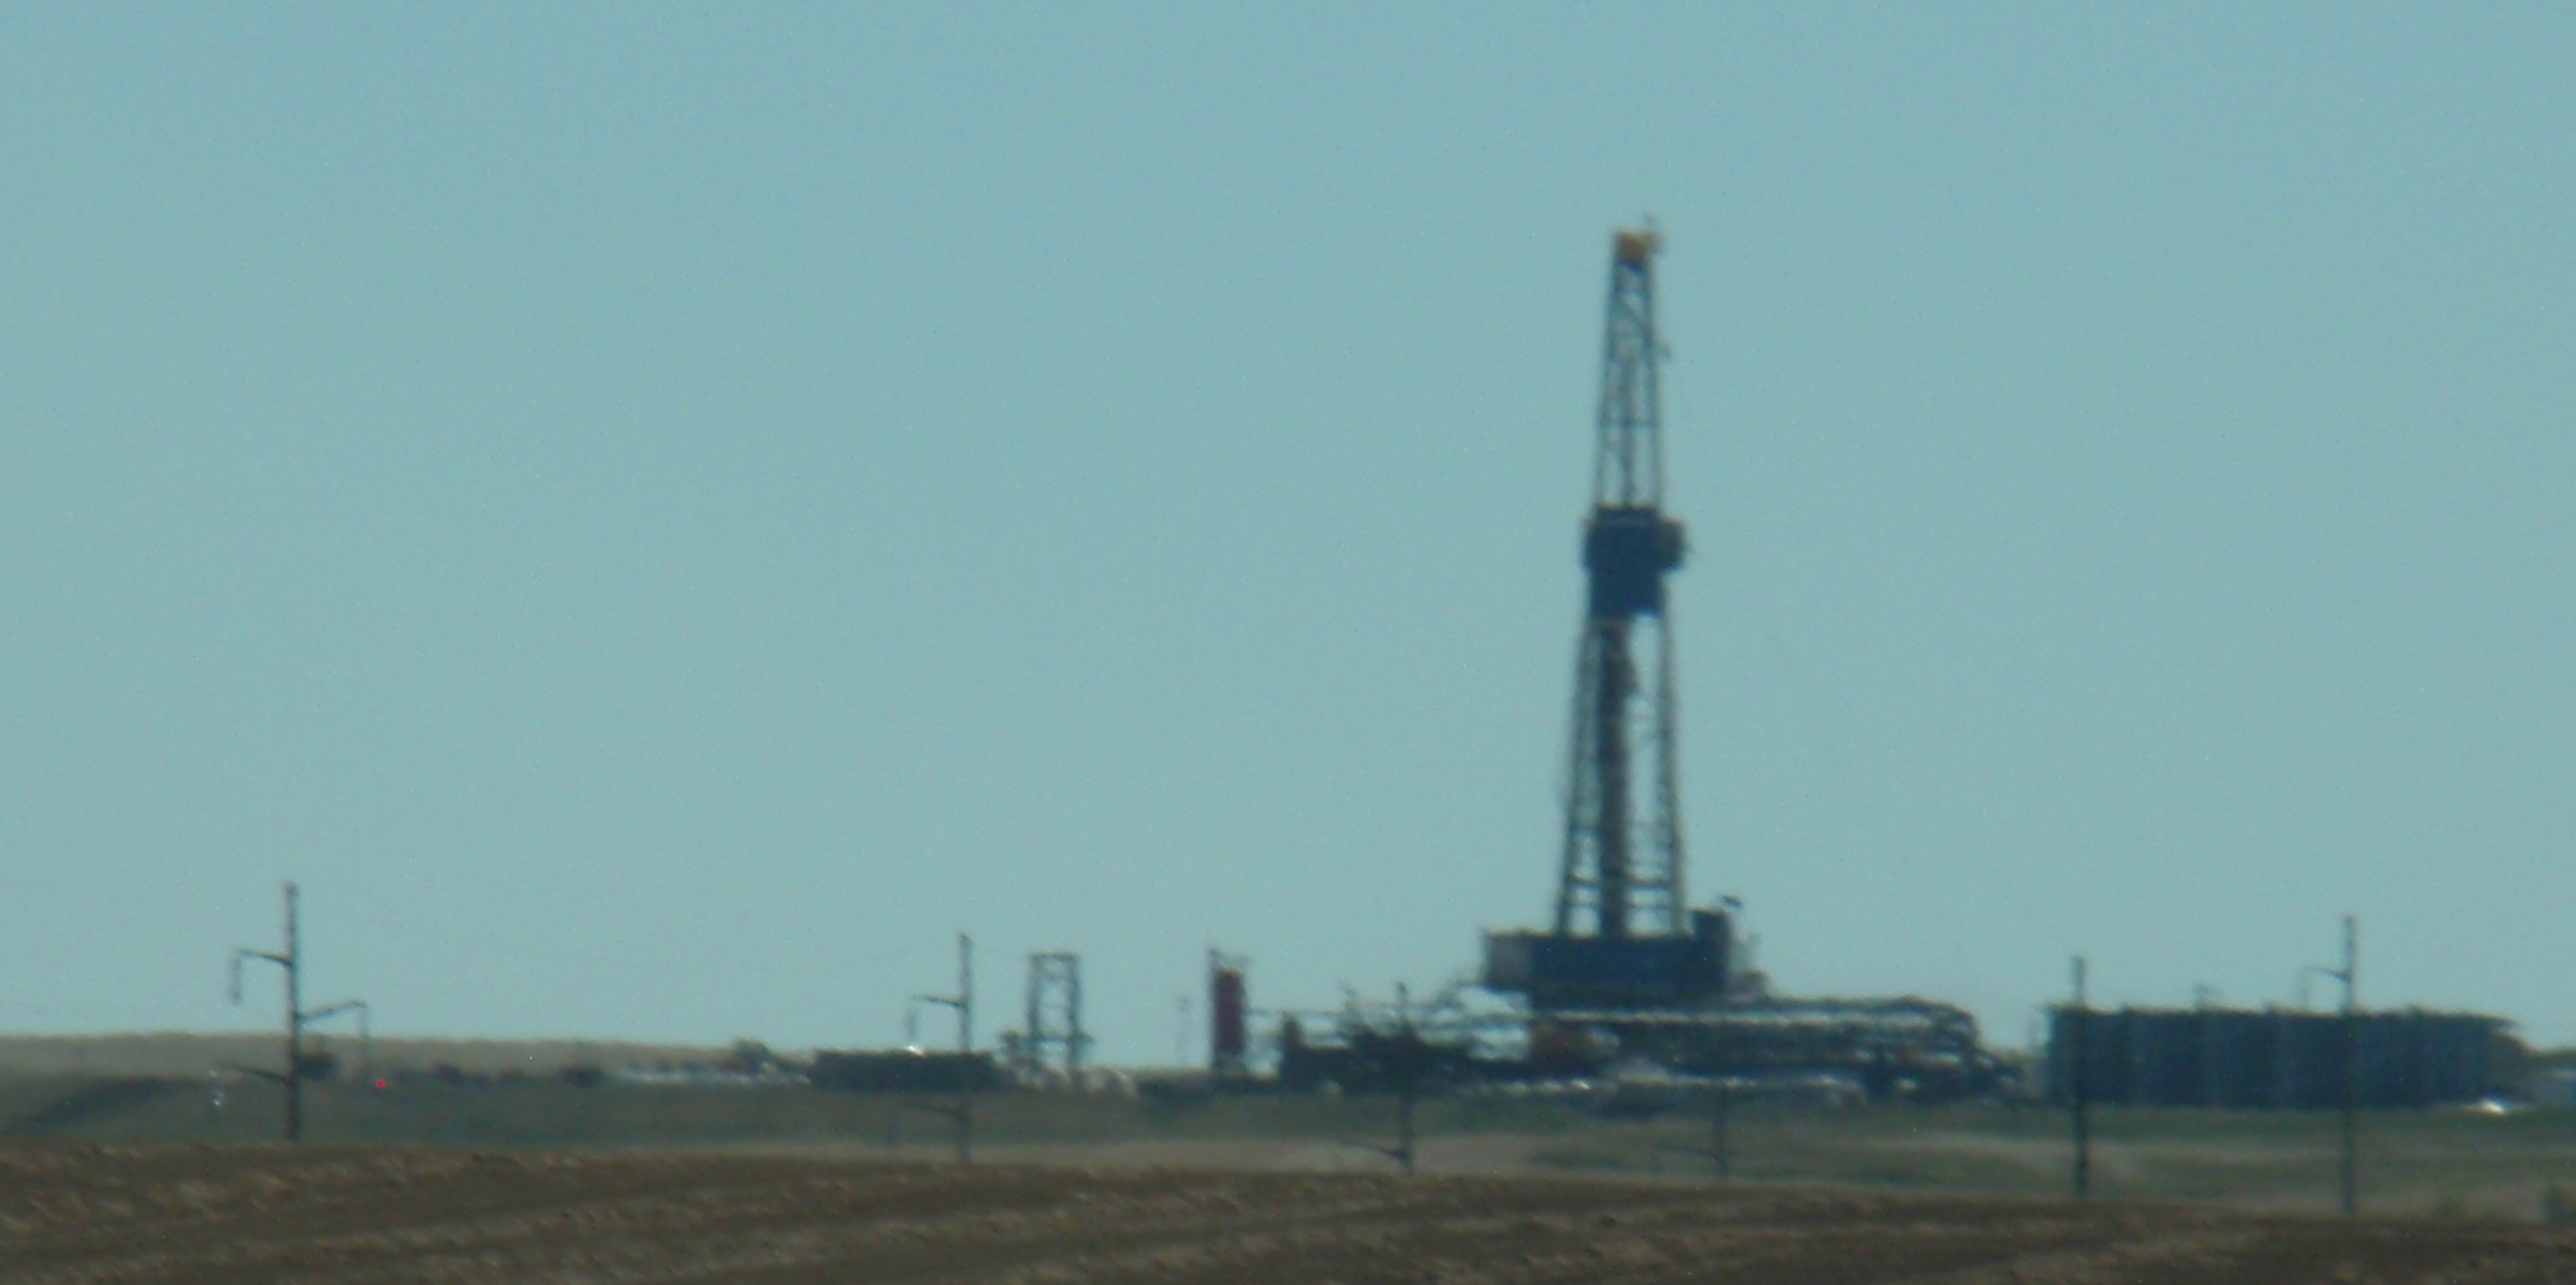 How fast do you suppose those drillers that scaled back could scale up? Out of focus photo by James Ulvog.